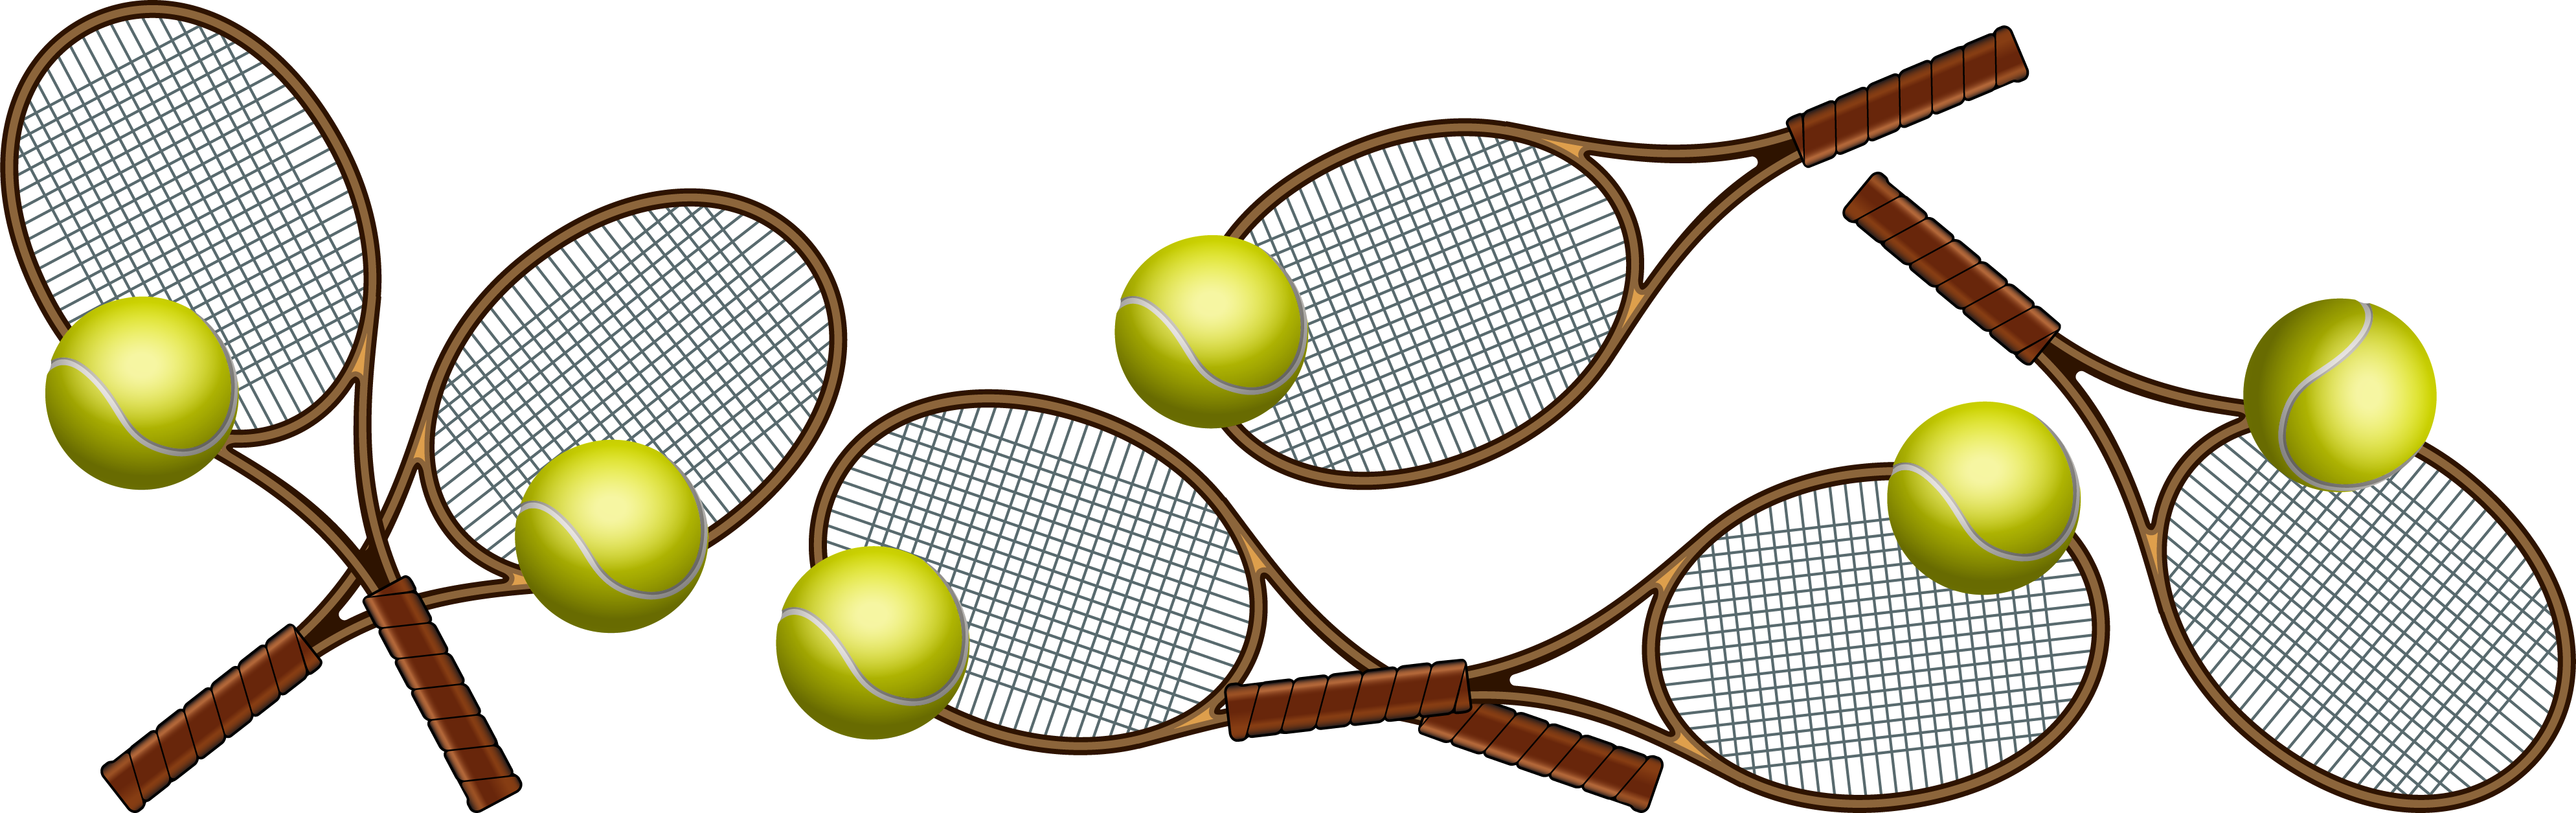 Graphic of tennis rackets and tennis balls